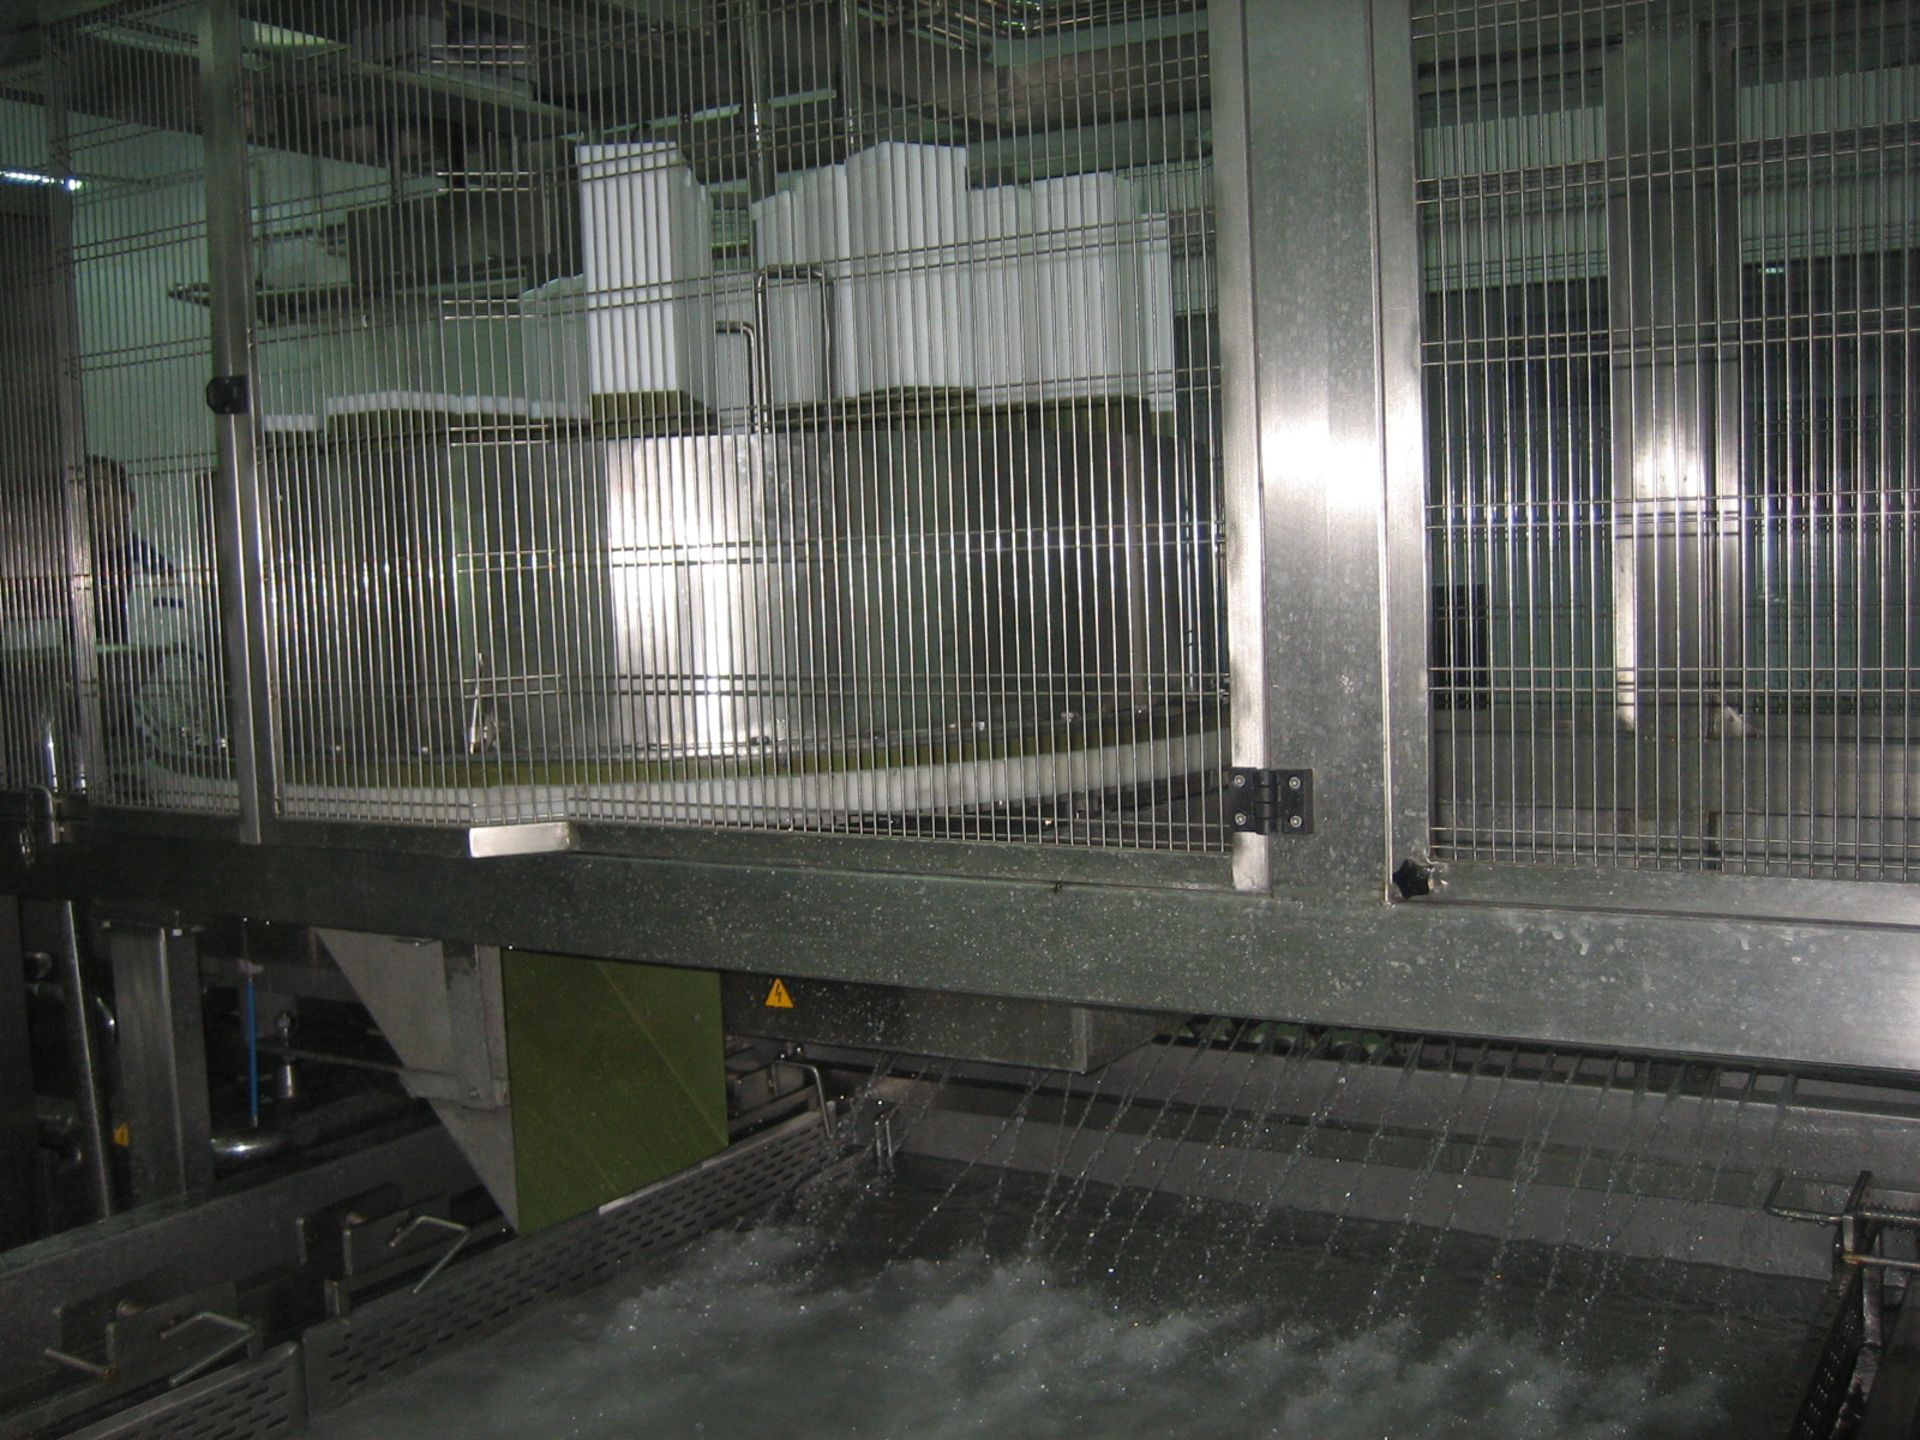 2X COMAT PROCESSING LINES FOR MOZZARELLA CHEESE TO PRODUCE MOZZARELLA STICKS AND MOZZARELLA BLOCKS - Image 7 of 11